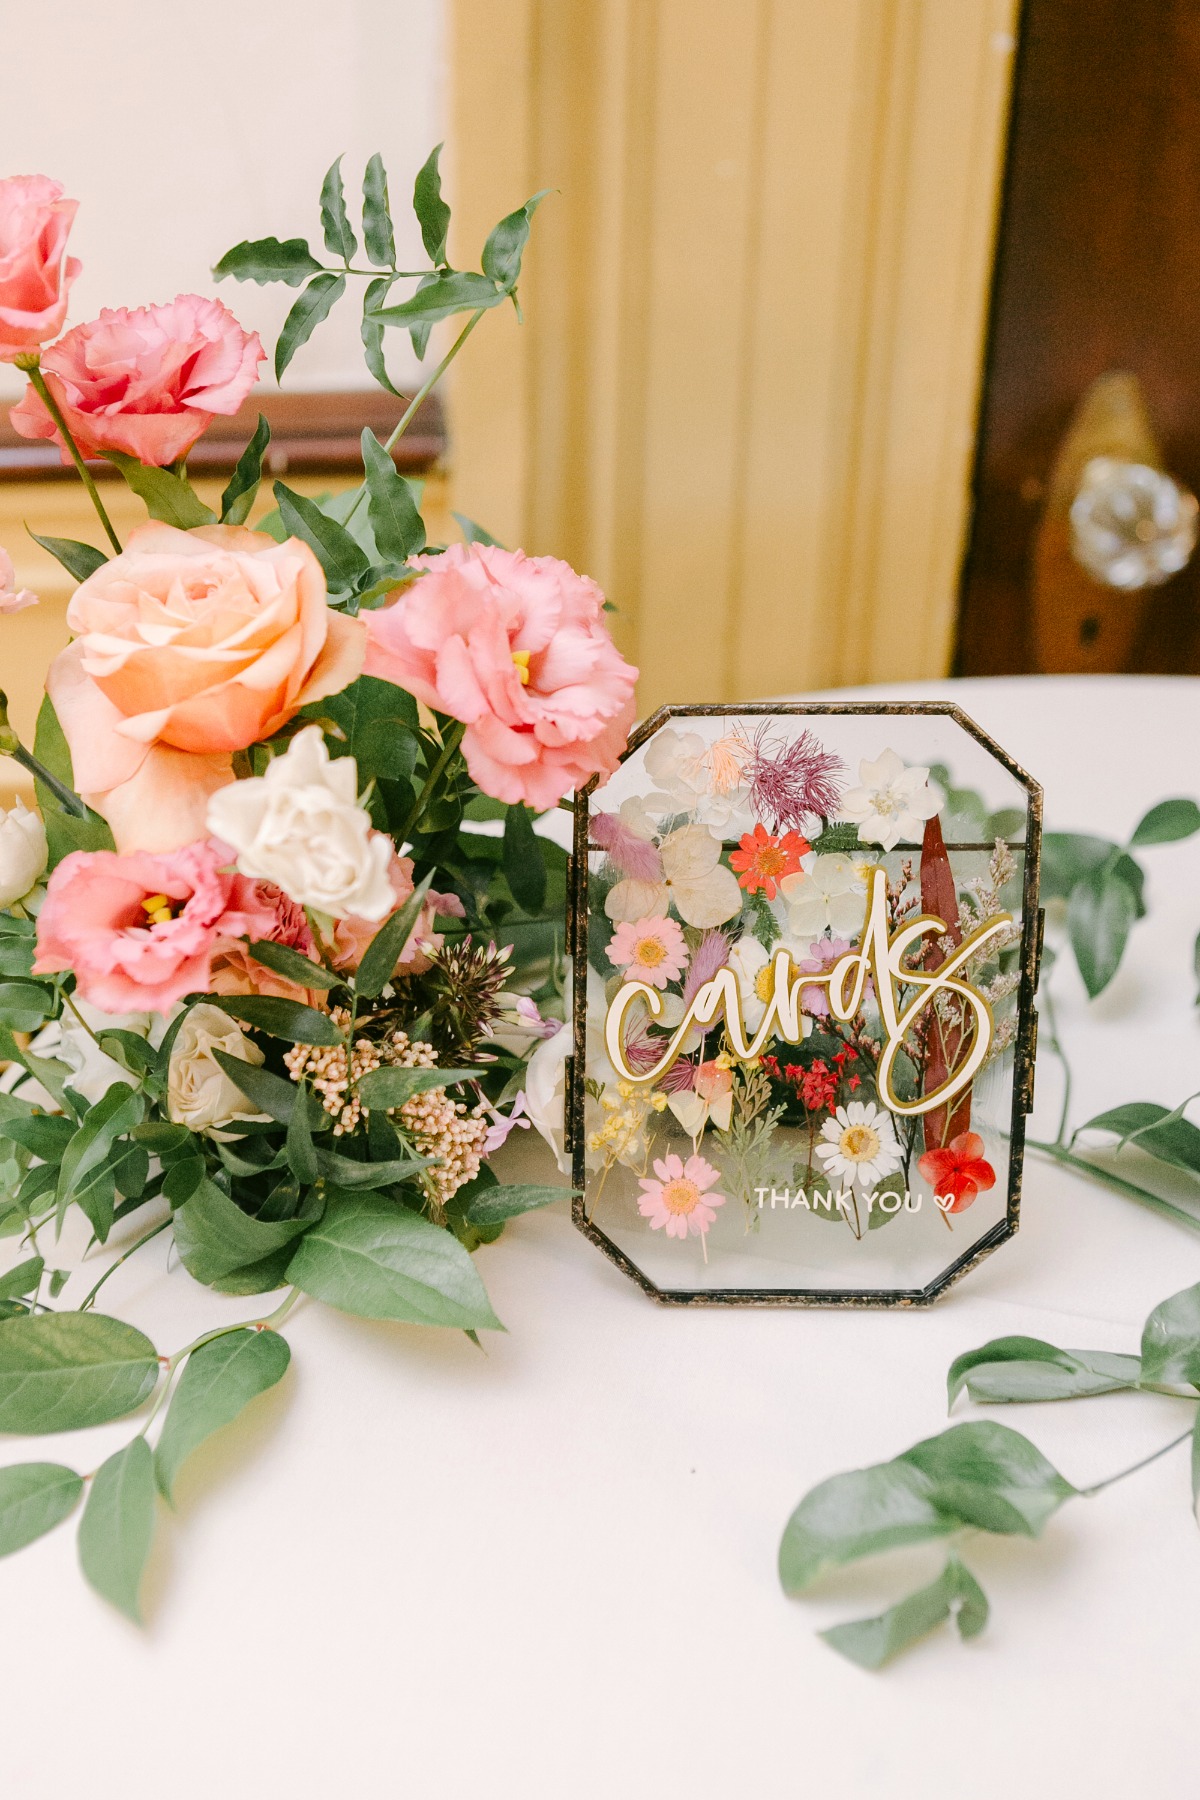 Reception card table sign with floral arrangement